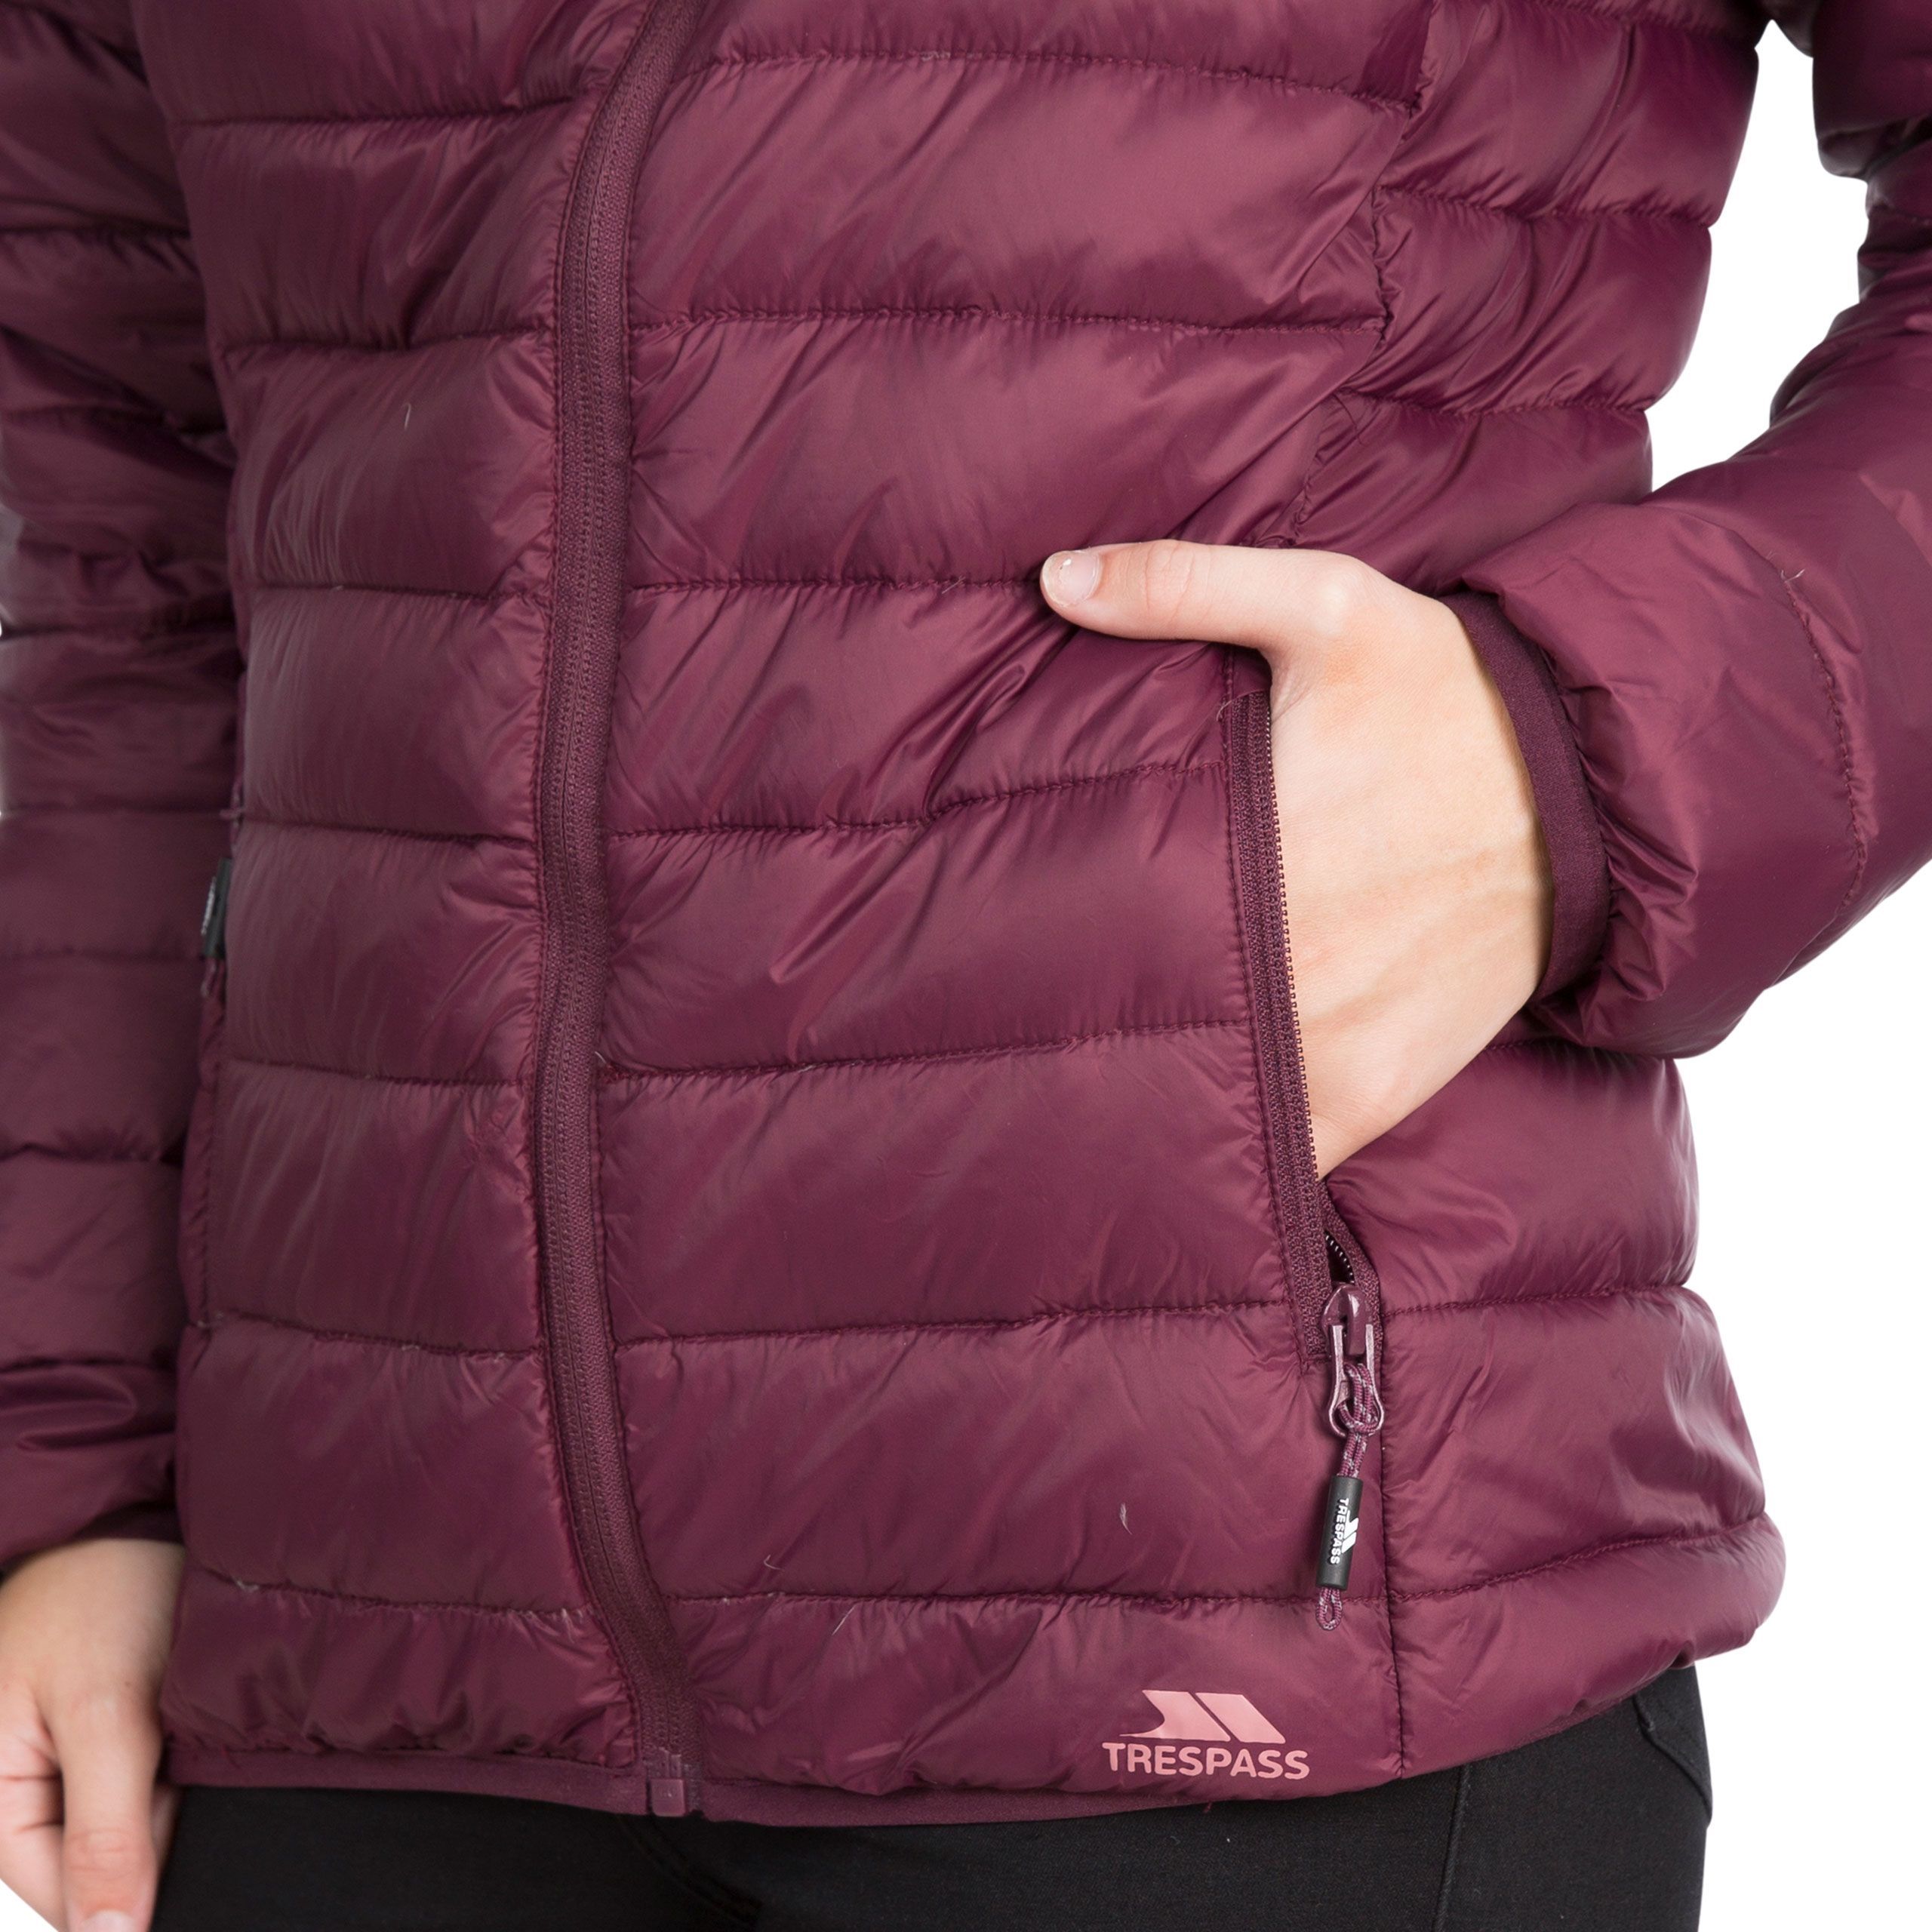 Ultra lightweight jacket with grown on hood and 2 lower zipped pockets. Low profile front zip. Stuff sack in pocket. Matching binding at hood, cuffs and hem. Shell: 100% polyamide. Lining: 100% polyamide. Filling: 90% down, 10% feathers. Trespass Womens Chest Sizing (approx): XS/8 - 32in/81cm, S/10 - 34in/86cm, M/12 - 36in/91.4cm, L/14 - 38in/96.5cm, XL/16 - 40in/101.5cm, XXL/18 - 42in/106.5cm.